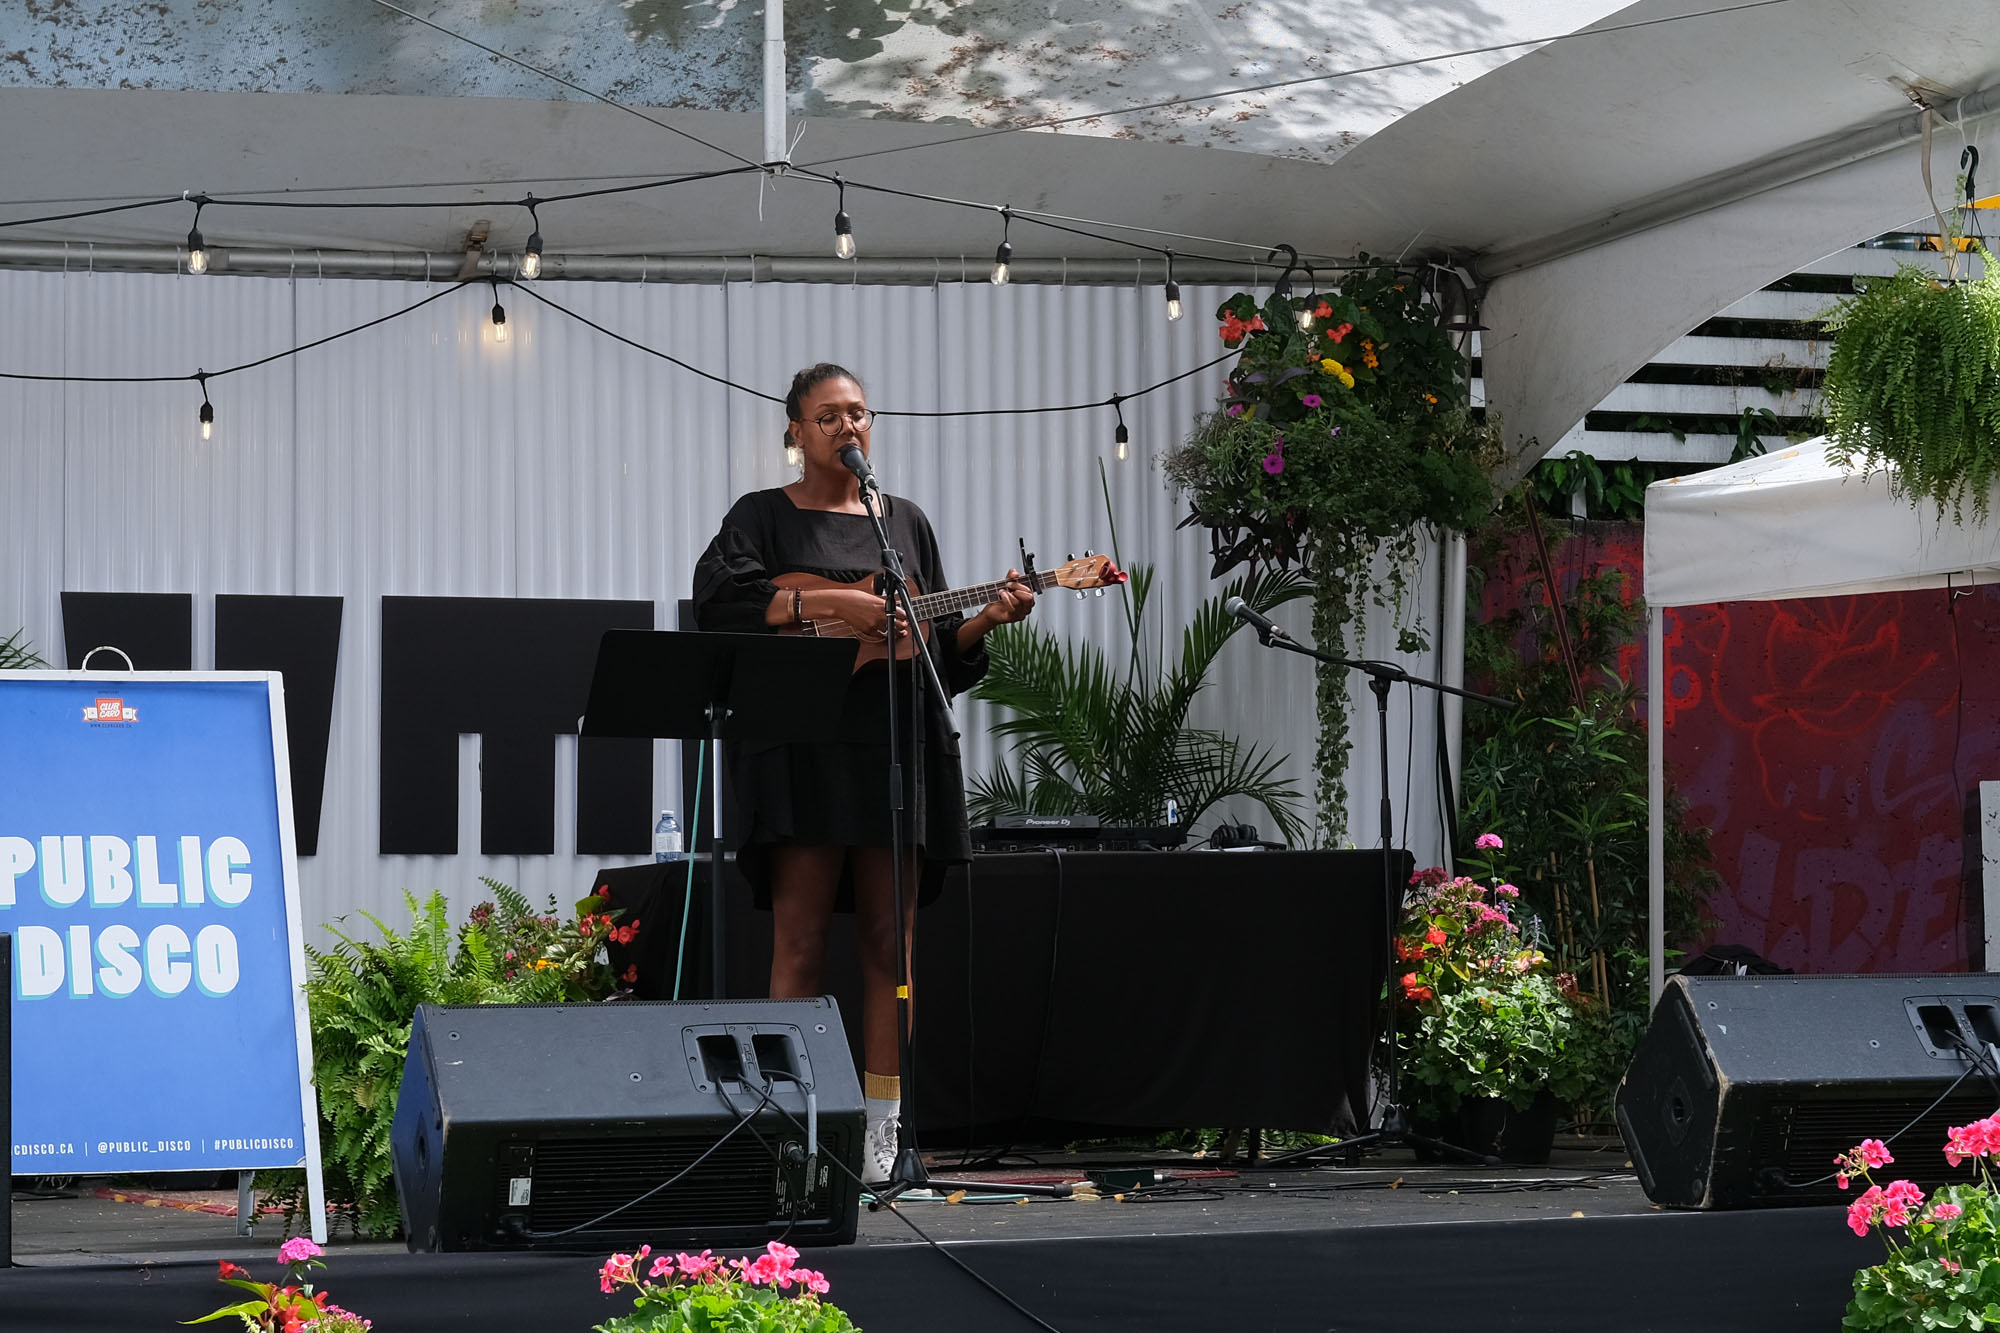 Vancouver musician Desirée Dawson plays a ukulele and sings on an outdoor stage.